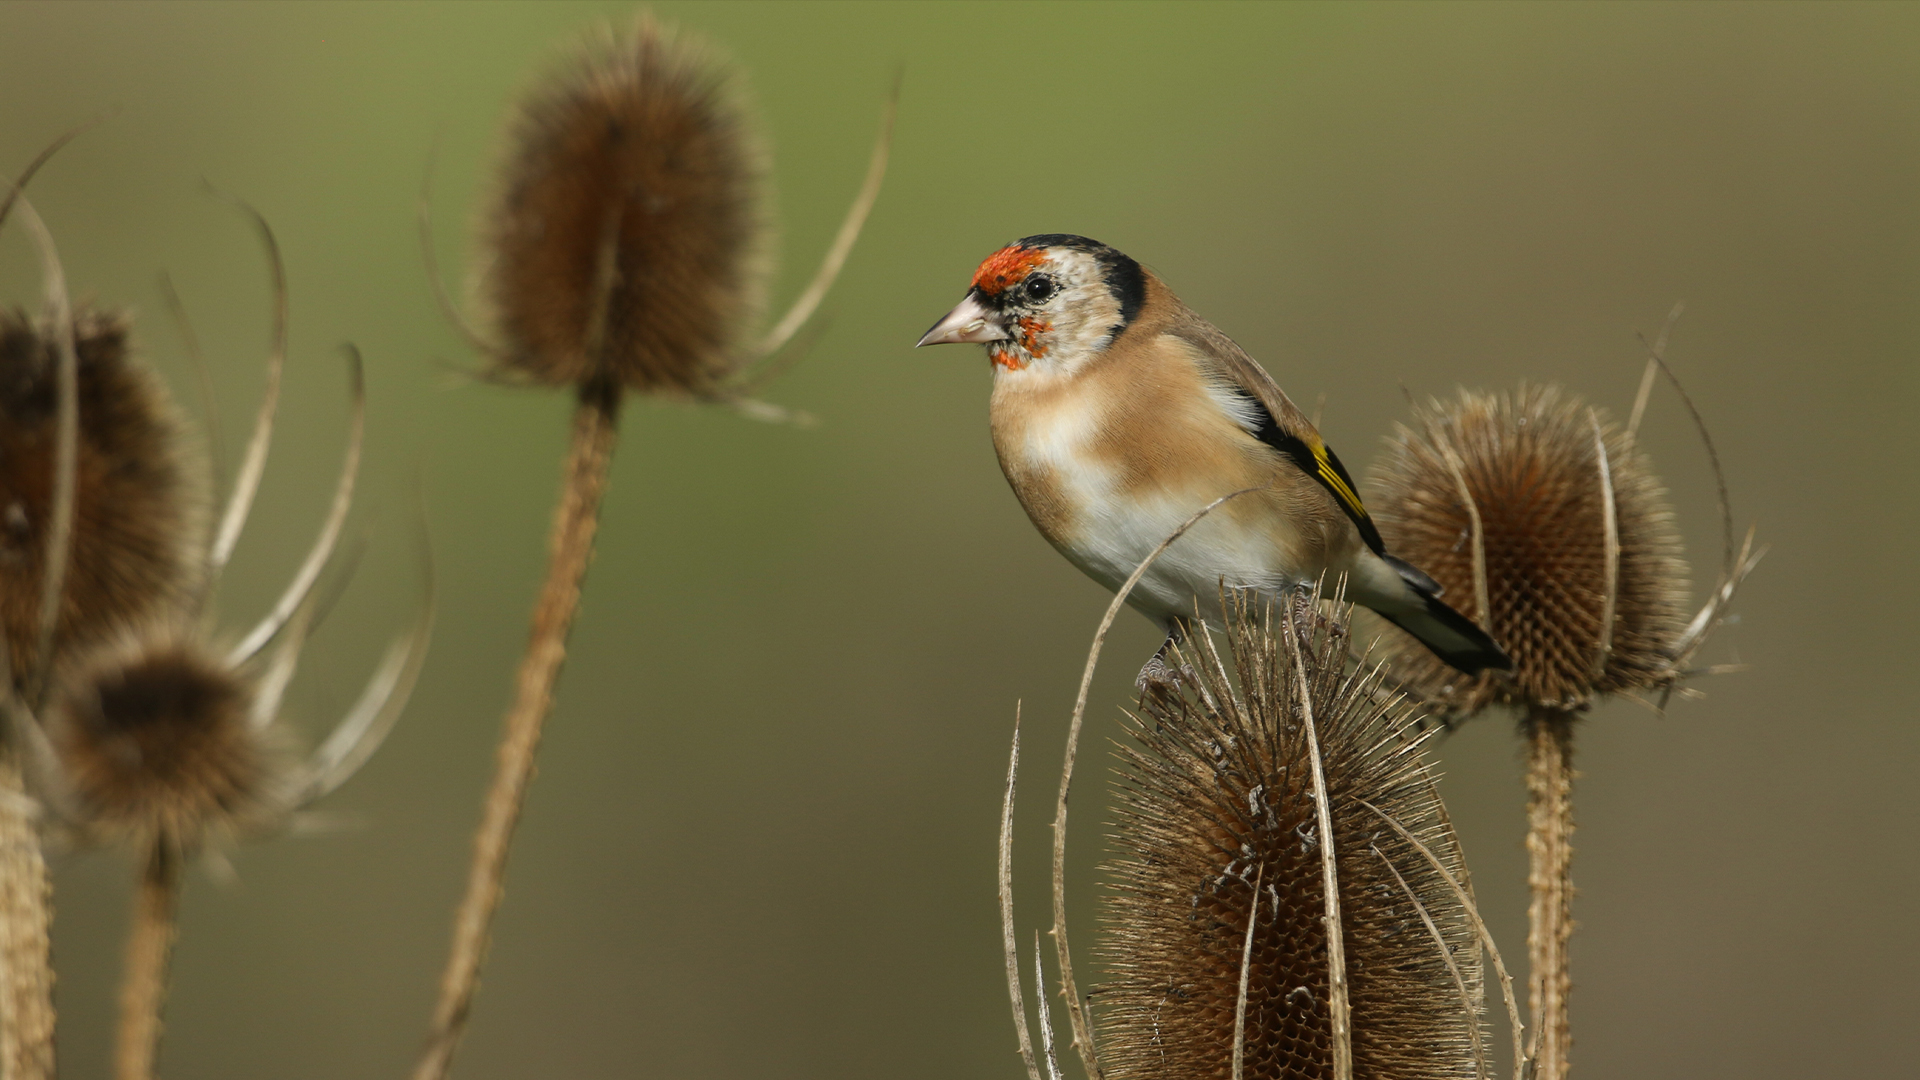 A goldfinch, Carduelis carduelis, feeding on the seeds of a thistle plant growing in the wild.